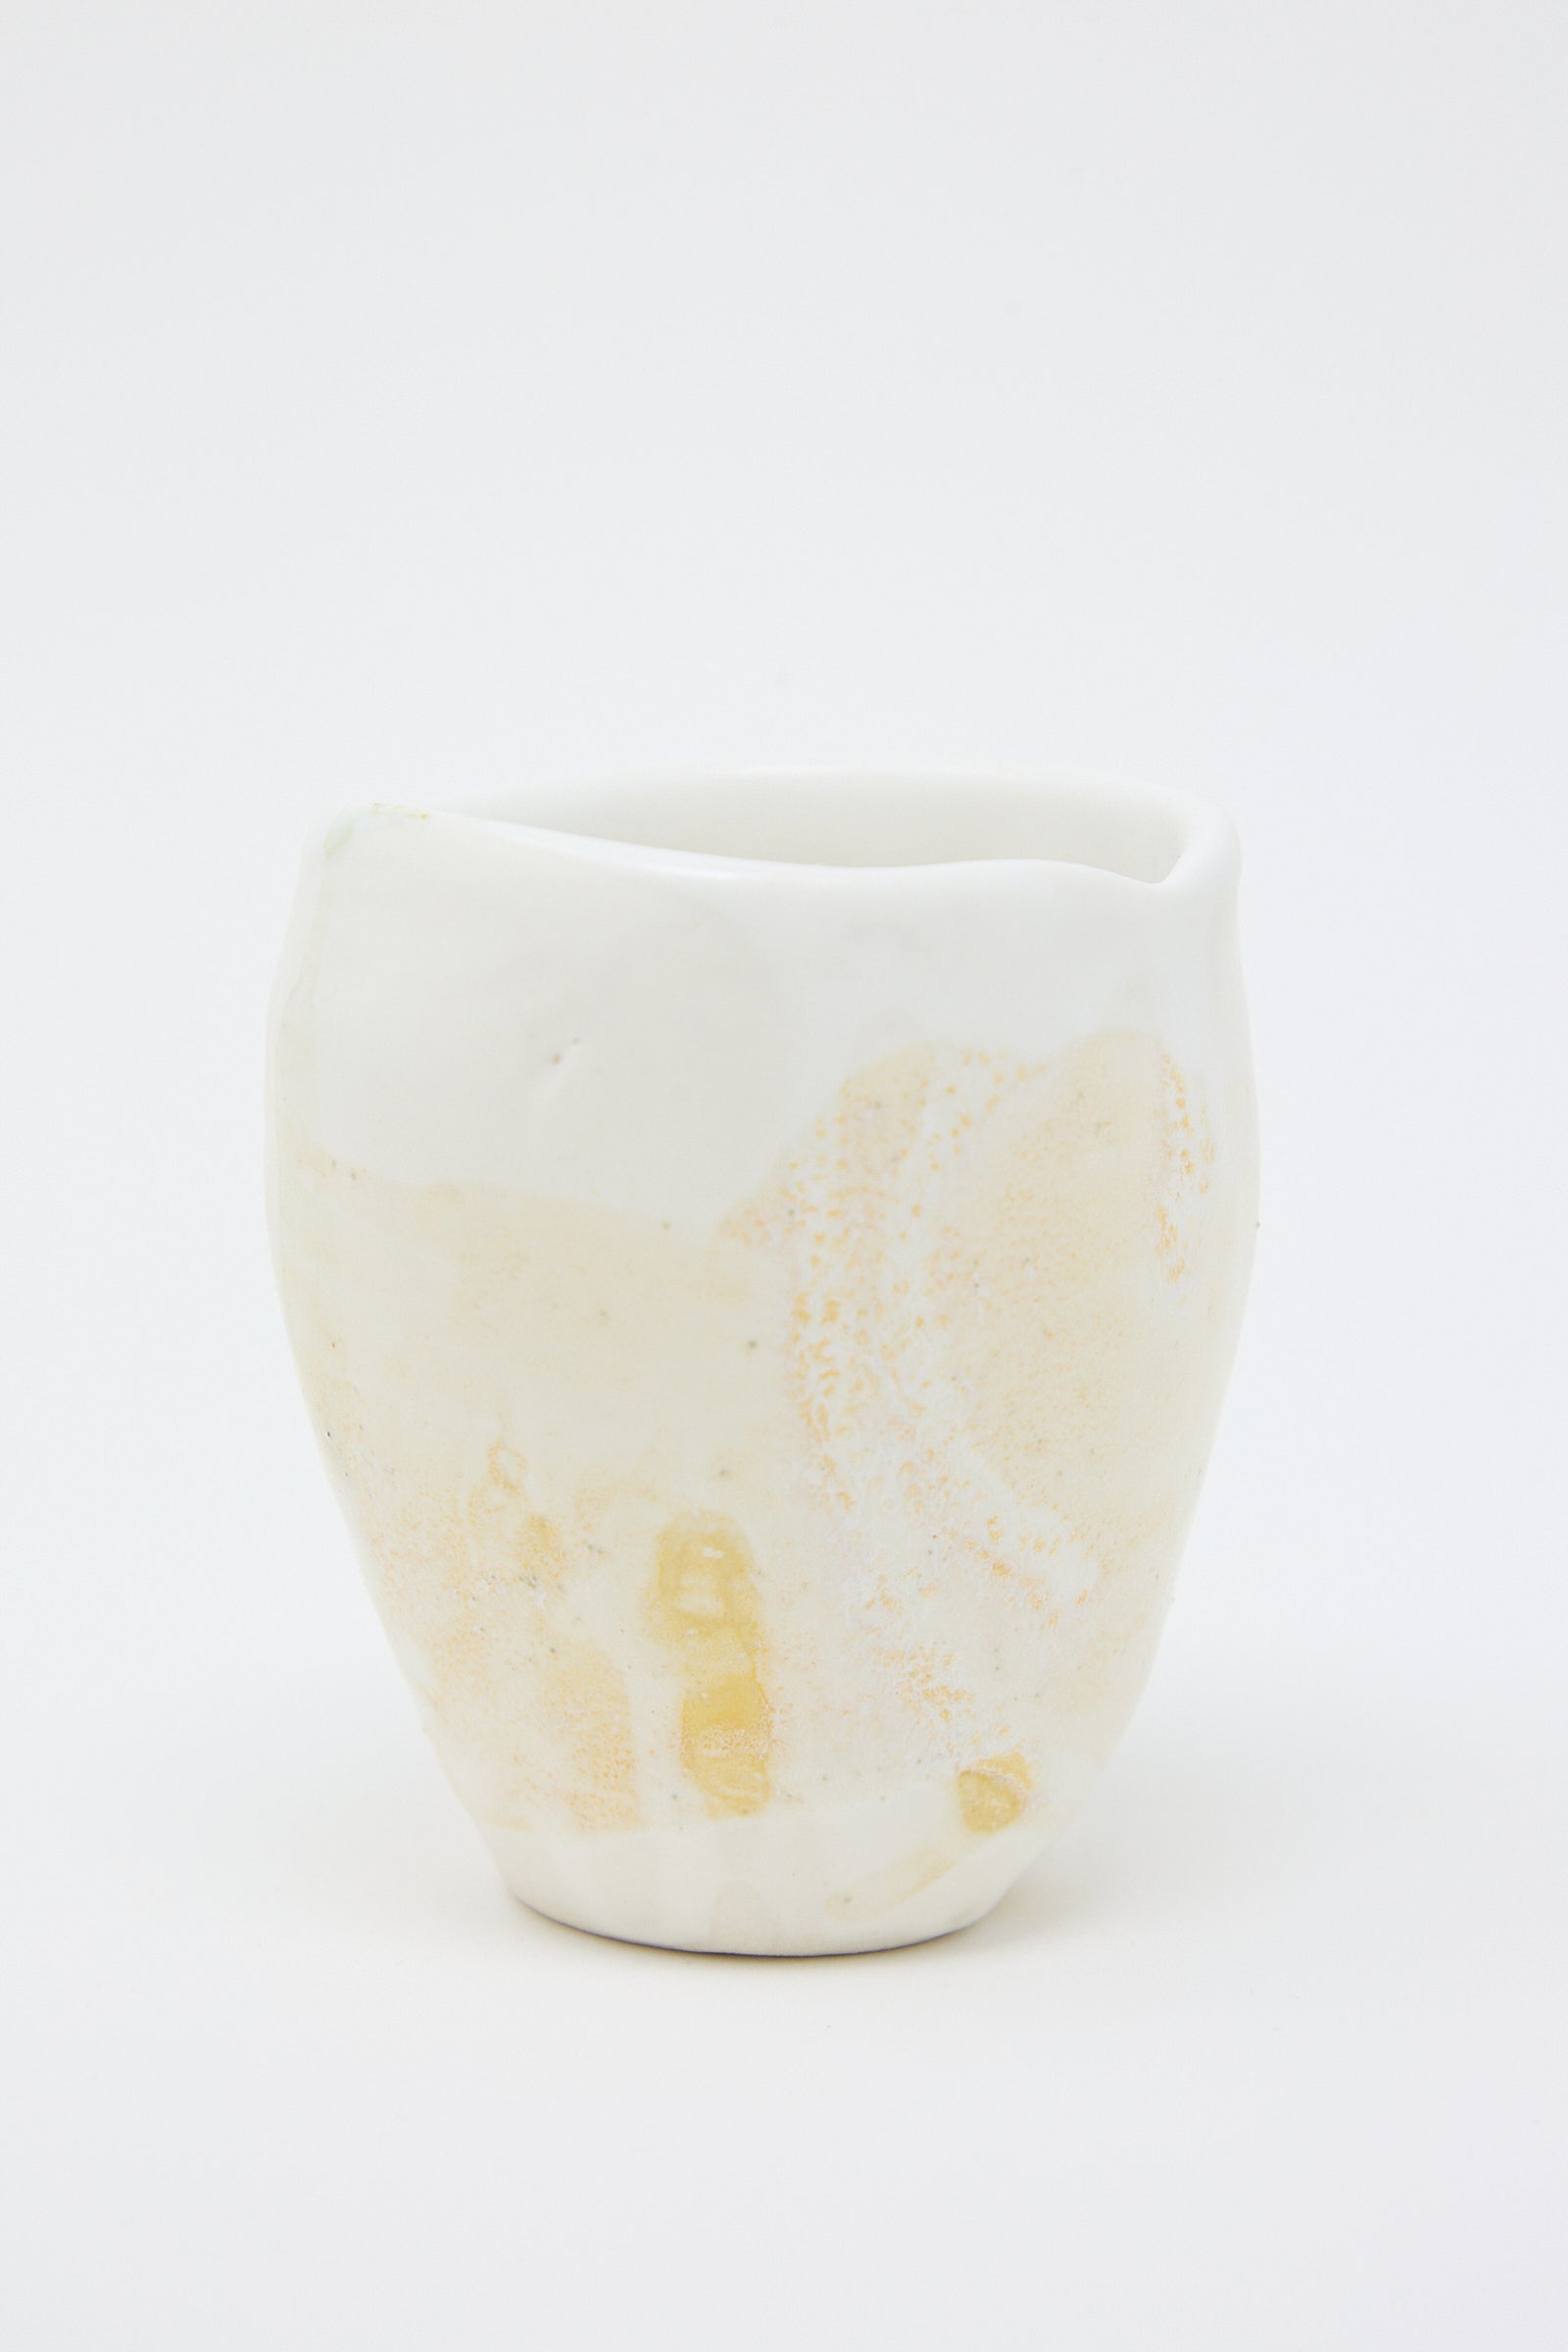 A beige and white porcelain tumbler from MONDAYS with a textured yellow glaze. Up close view.